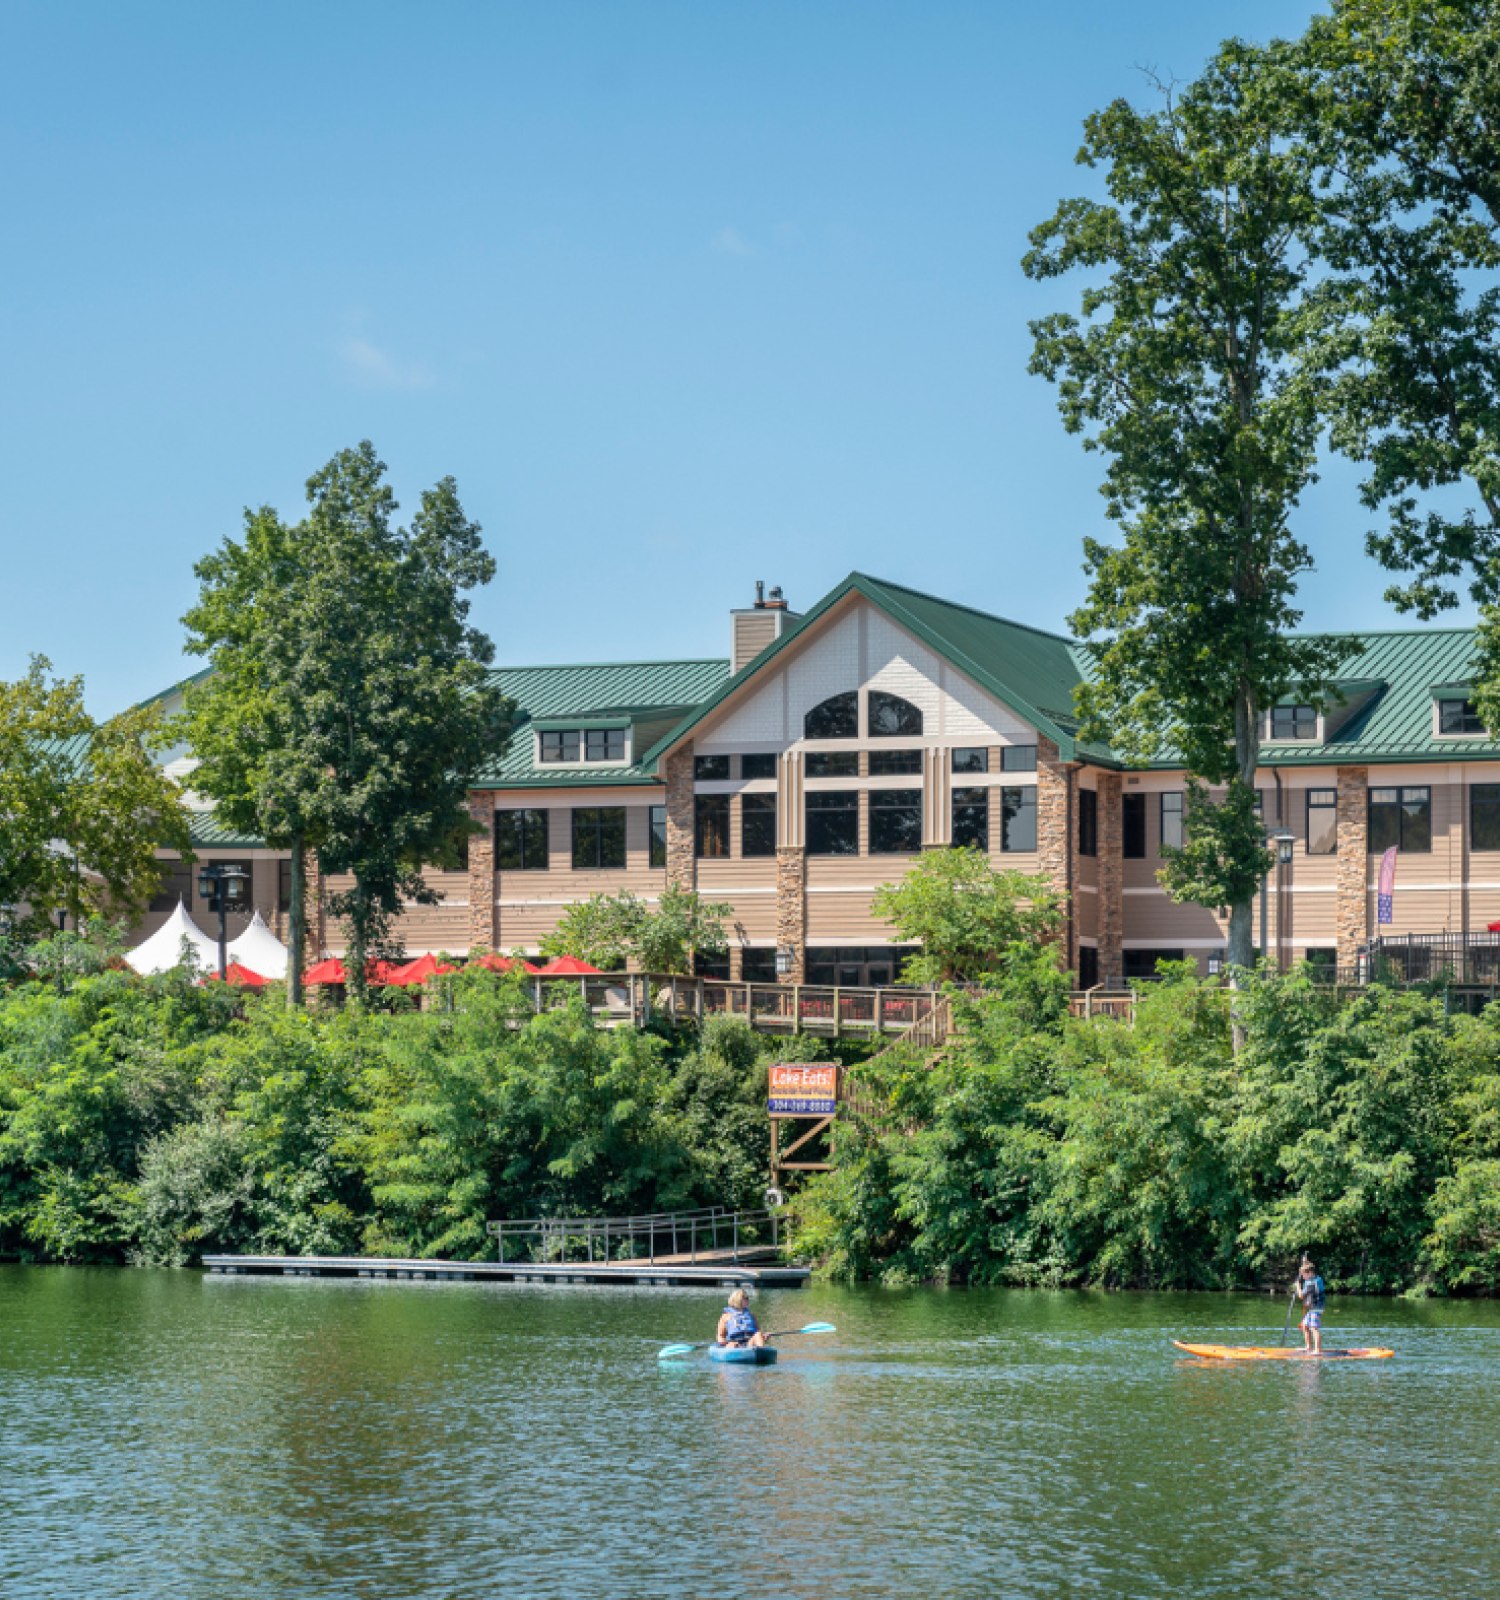 A large building by a river with people kayaking in the water, surrounded by lush greenery and trees under a clear blue sky.